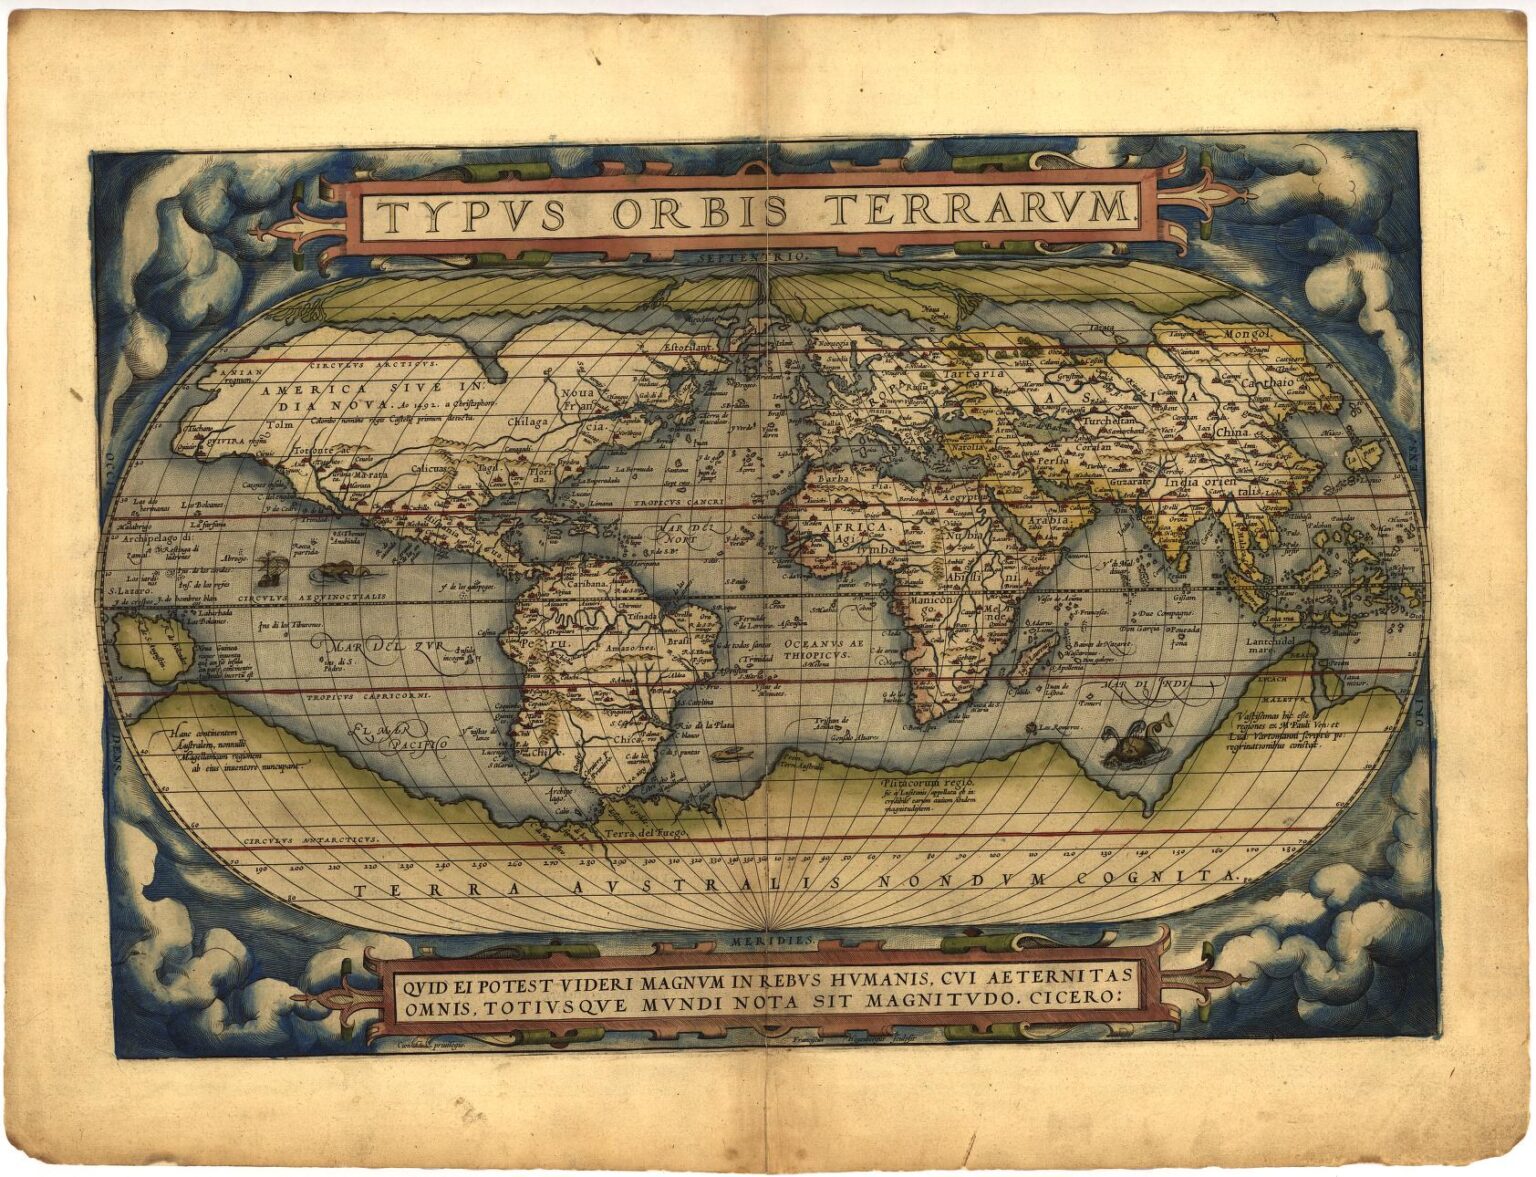 In Cod We Trust: Fishing Grounds and National Ambitions in Early Maps of North America